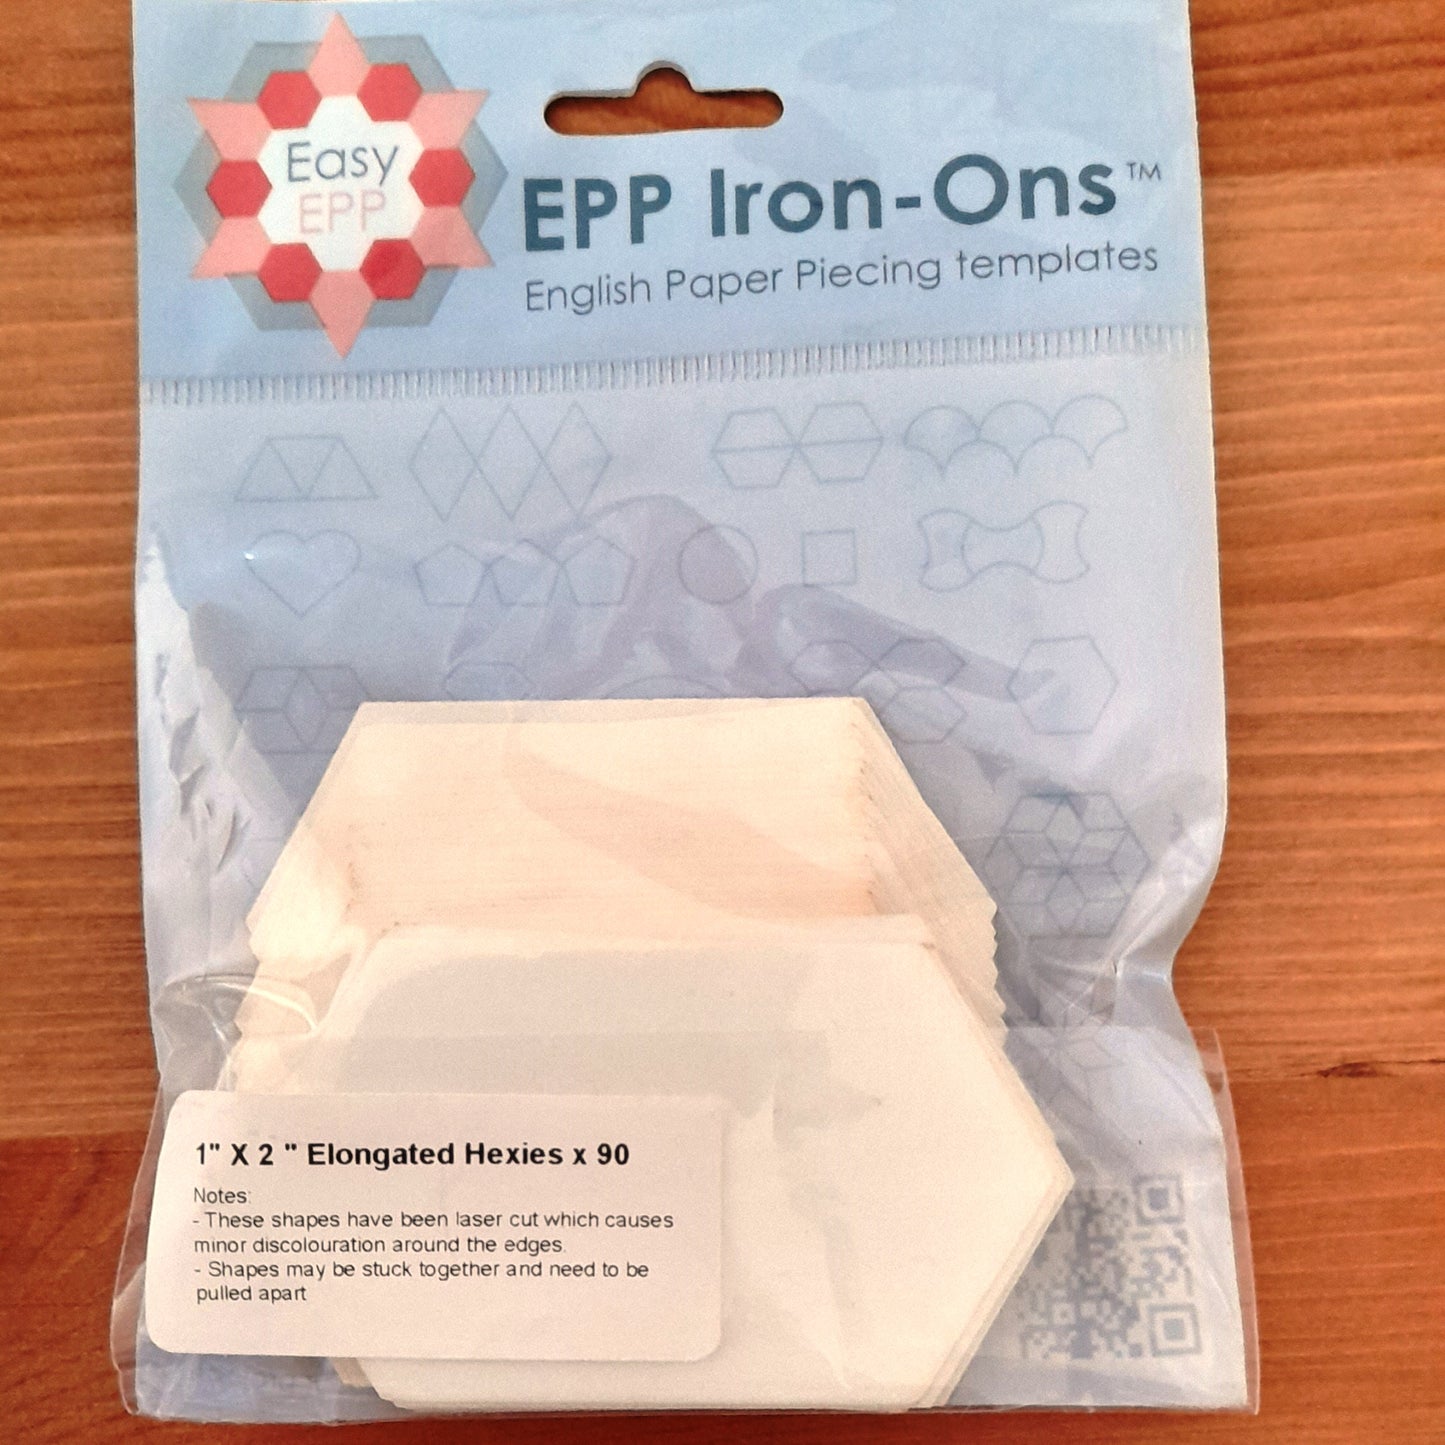 Elongated Hexagons 1" x 2", 90 fusible iron on papers for EPP English Paper Piecing Hugs n Kisses